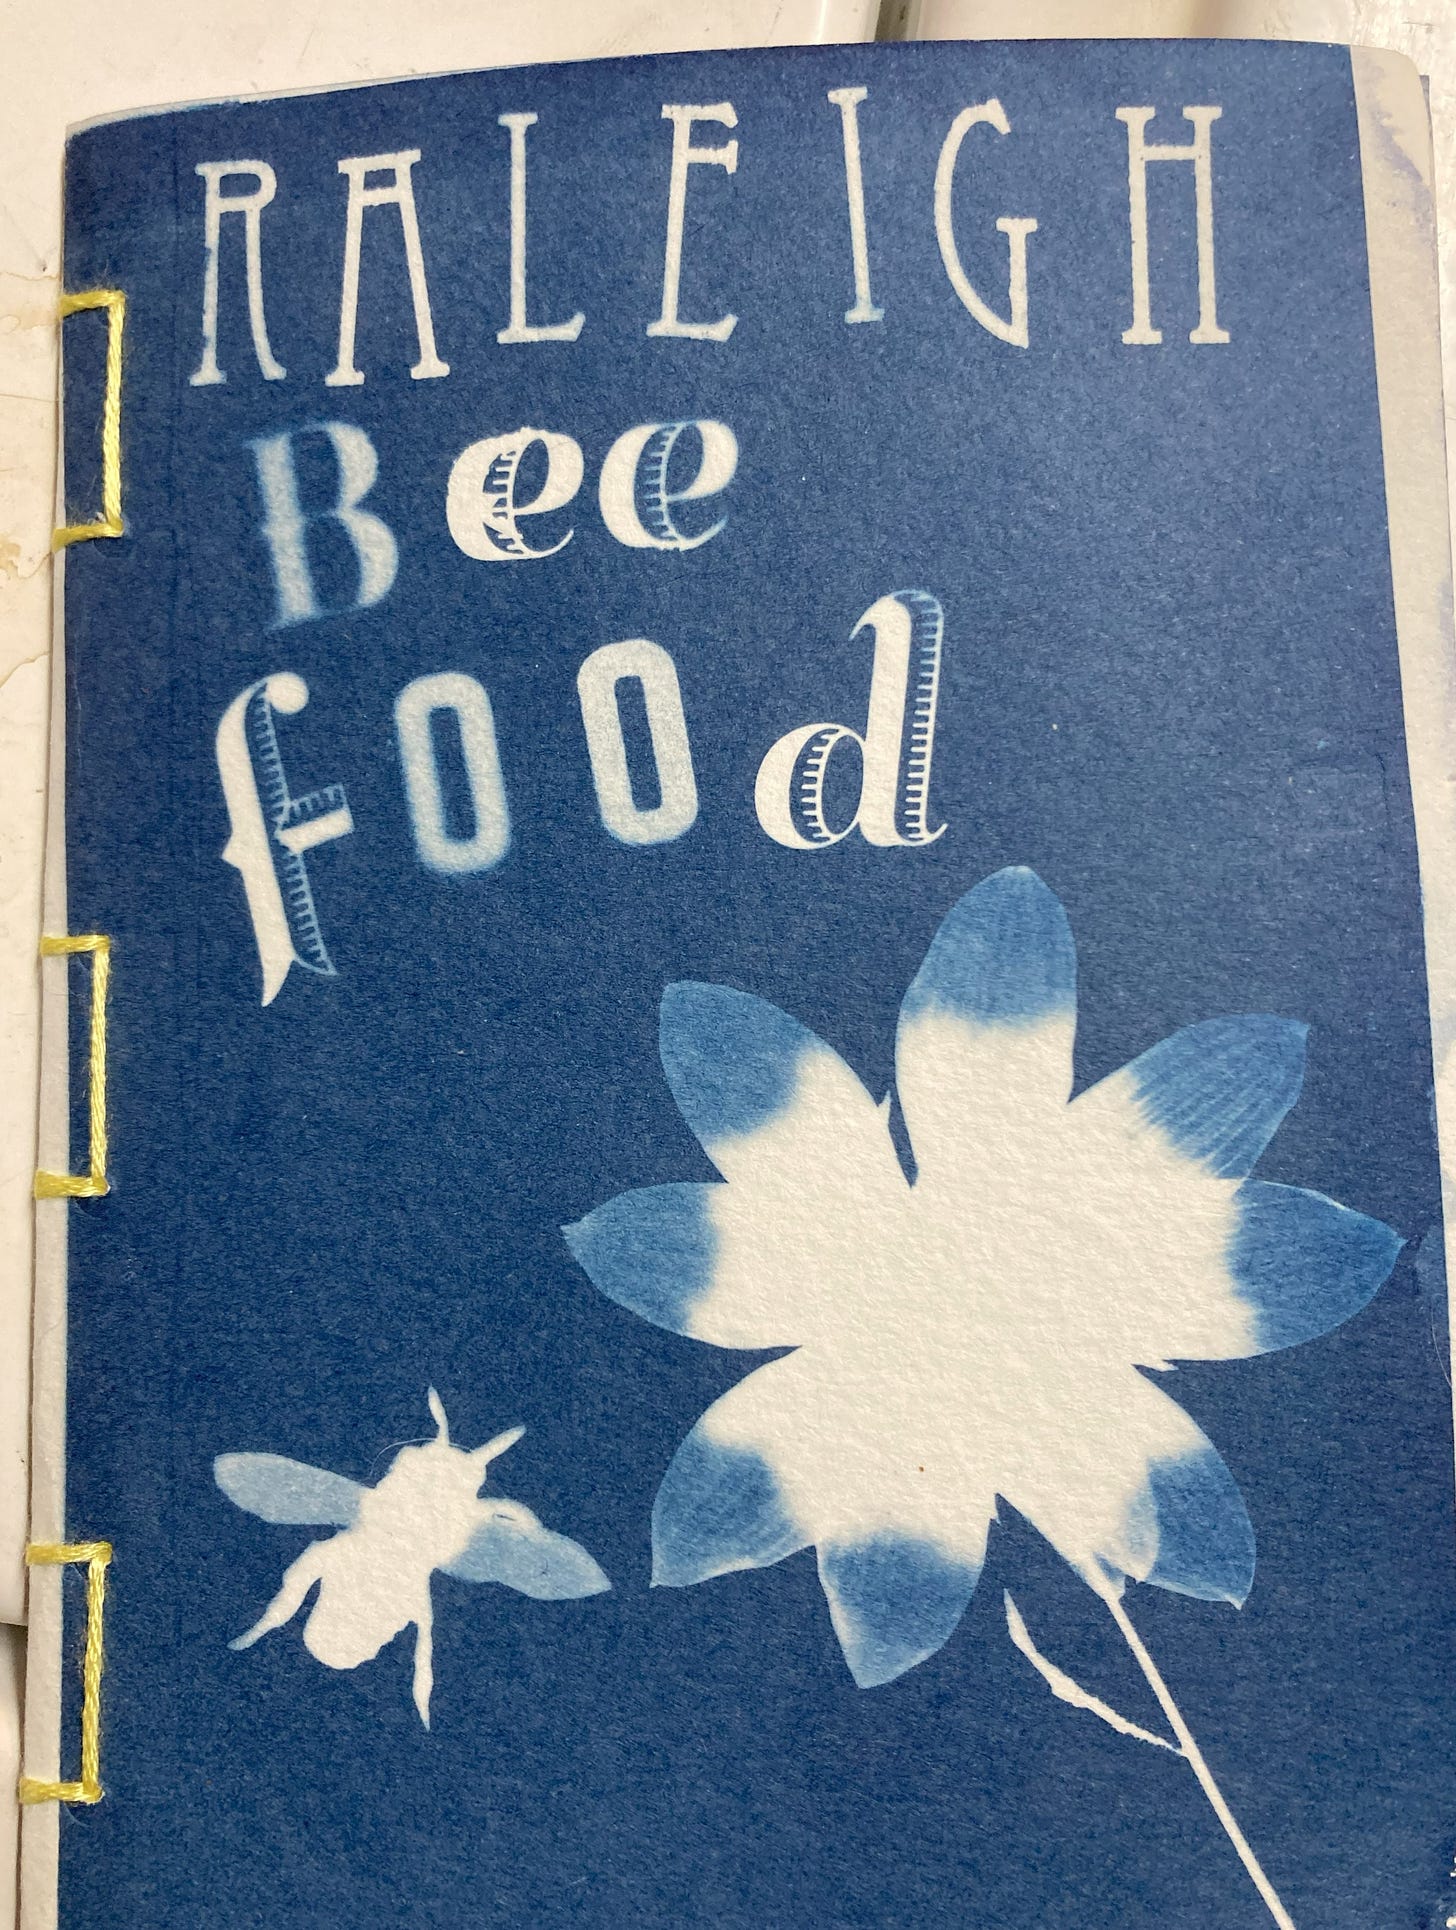 Cyanotype printed zine, Raleigh Bee Food, with a flower and bee printed in blue and white. 